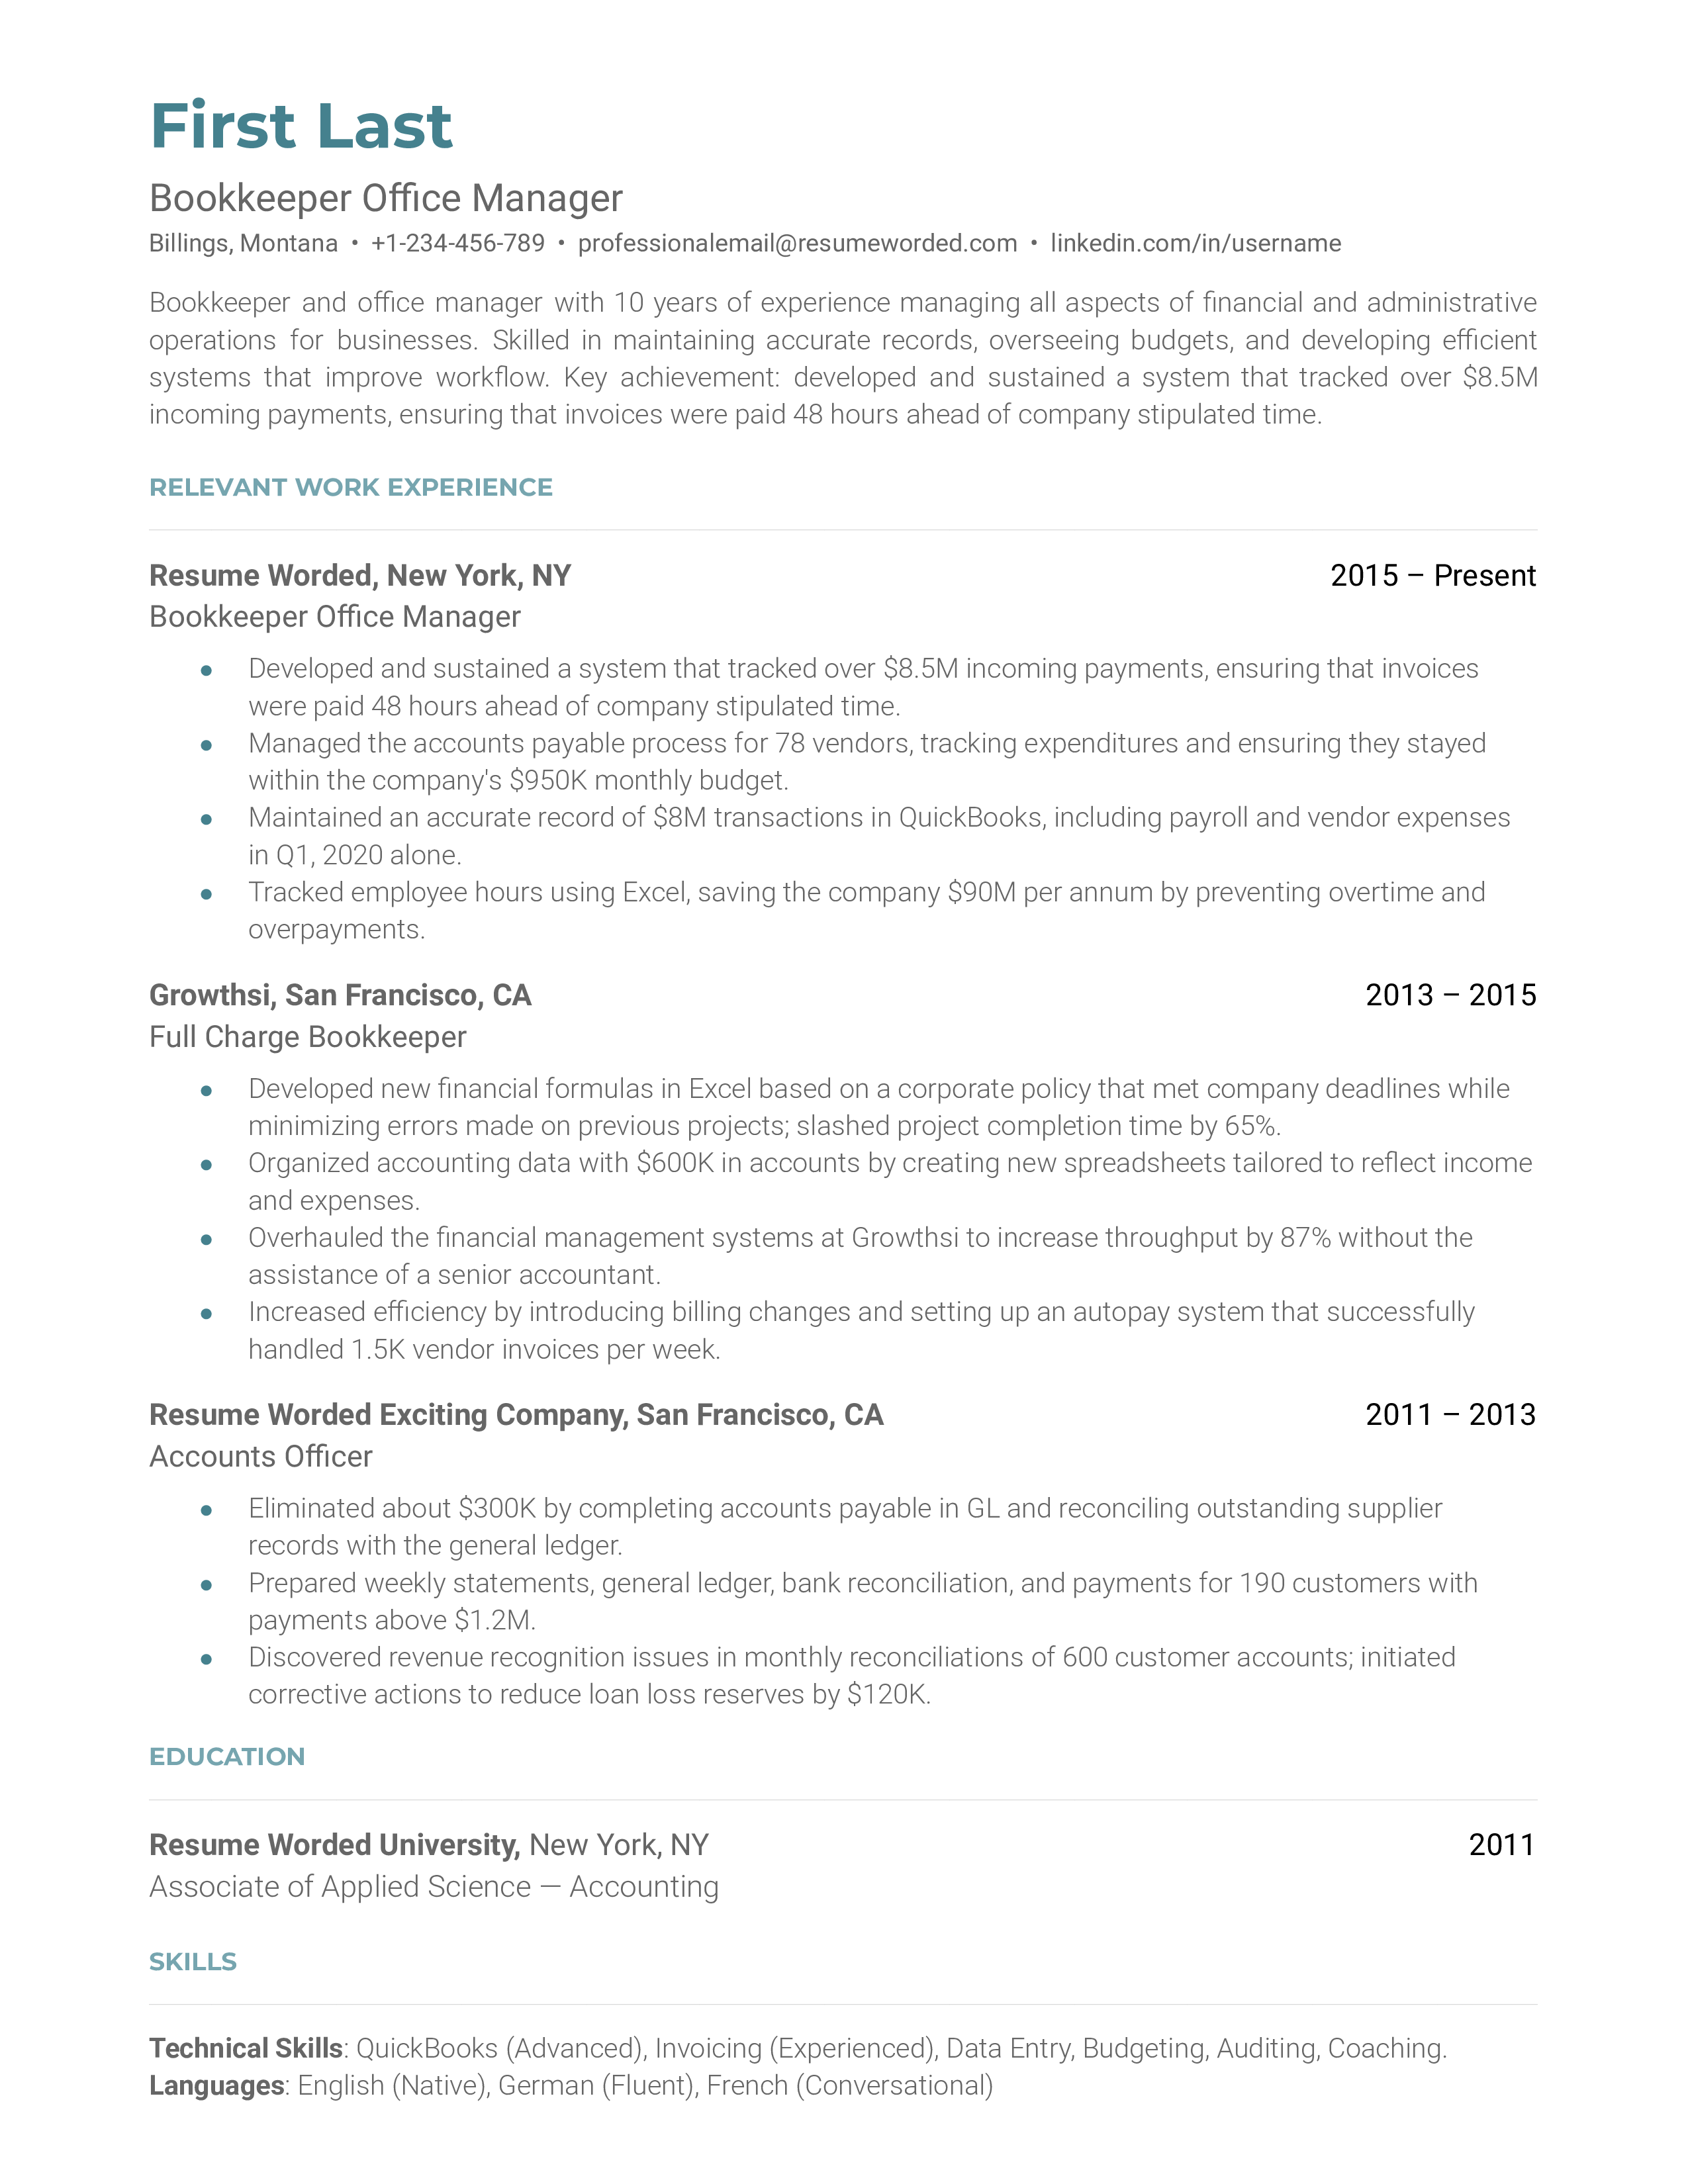 Bookkeeper office manager resume sample that highlights the applicant’s career growth and experience.